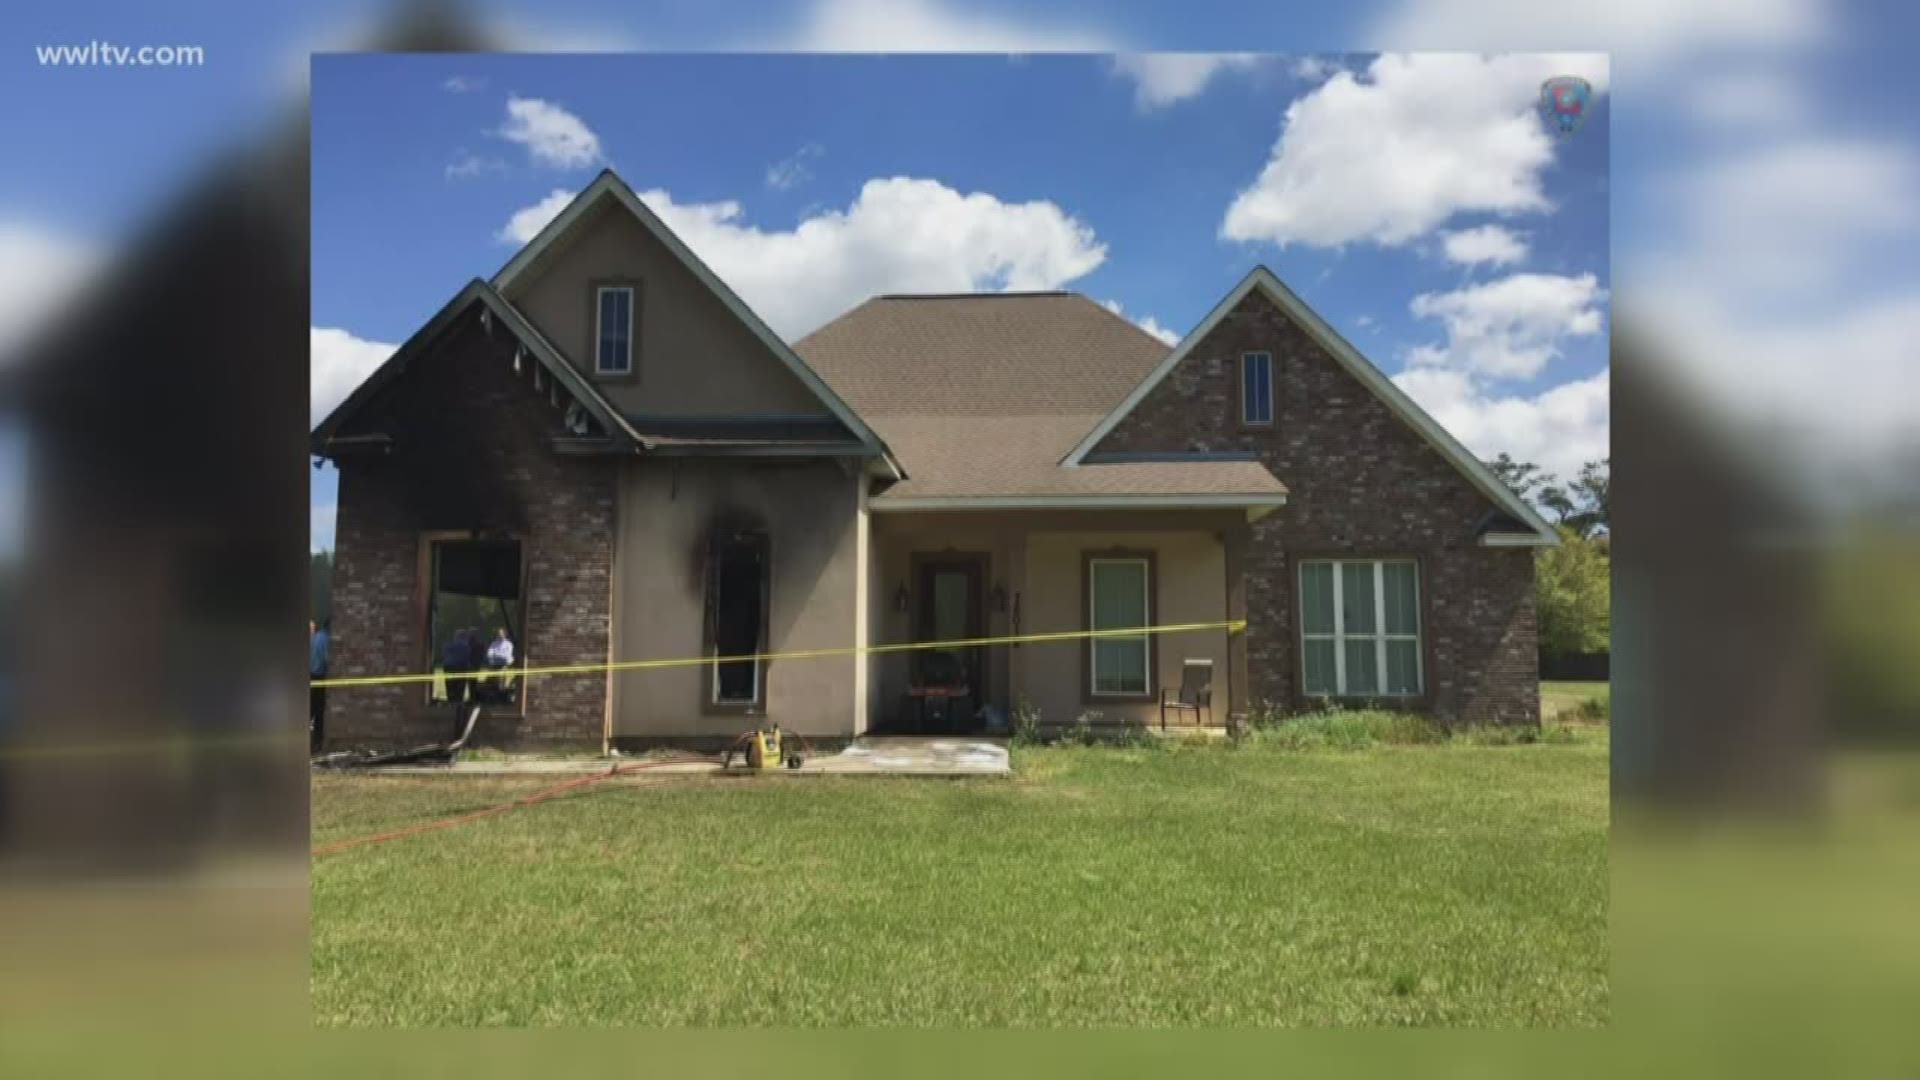 A mid-morning fire in rural Covington has claimed the life of one person, according to the State Fire Marshal's office.